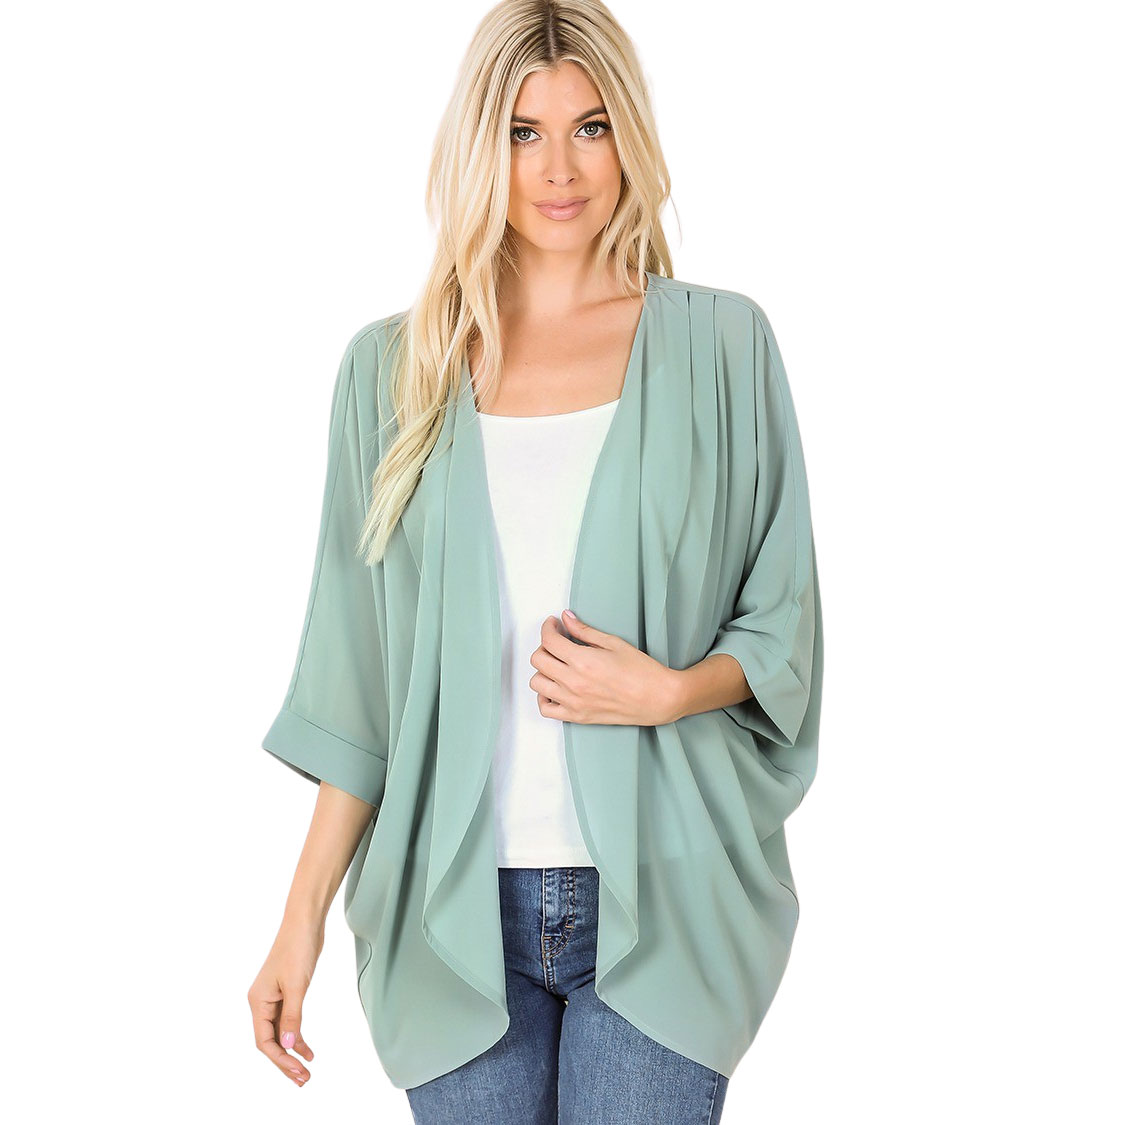 Wholesale Cardigan - Woven Chiffon with Shoulder Pleat 2721-LIGHT GREEN ...